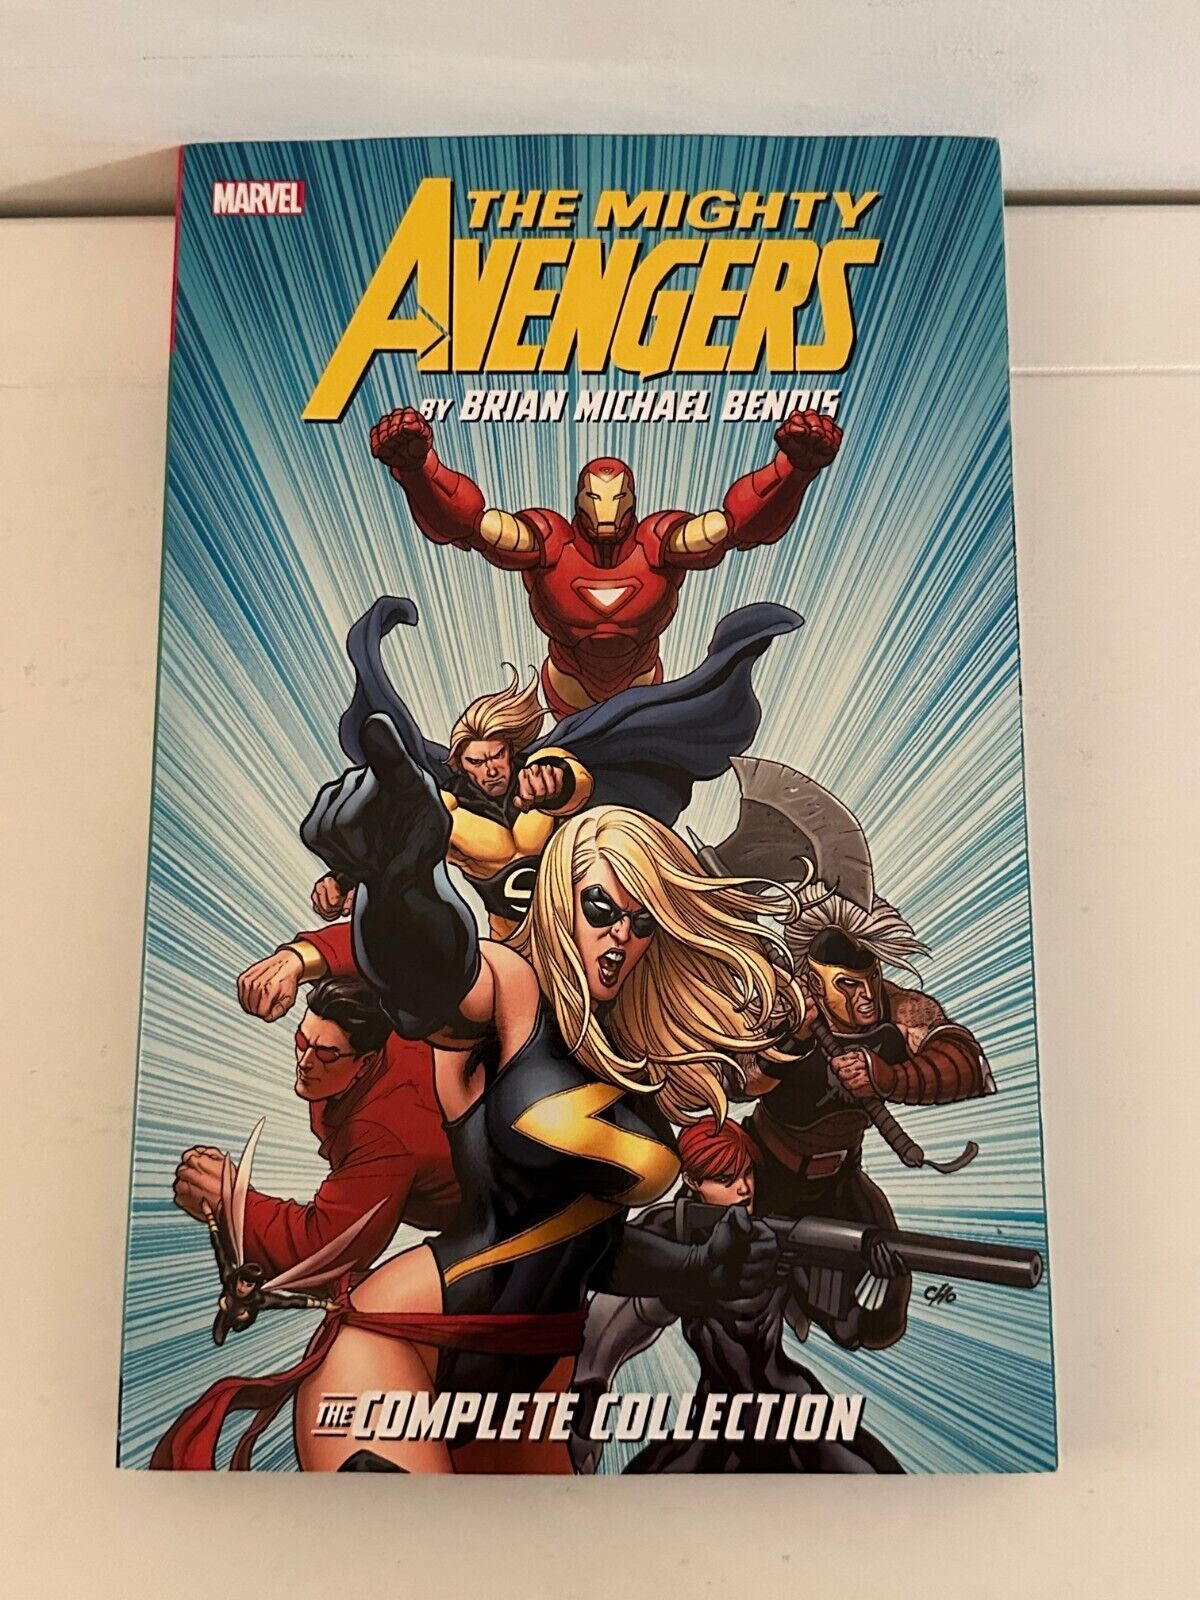 Mighty Avengers: The Complete Collection by Brian Michael Bendis Trade Paperback